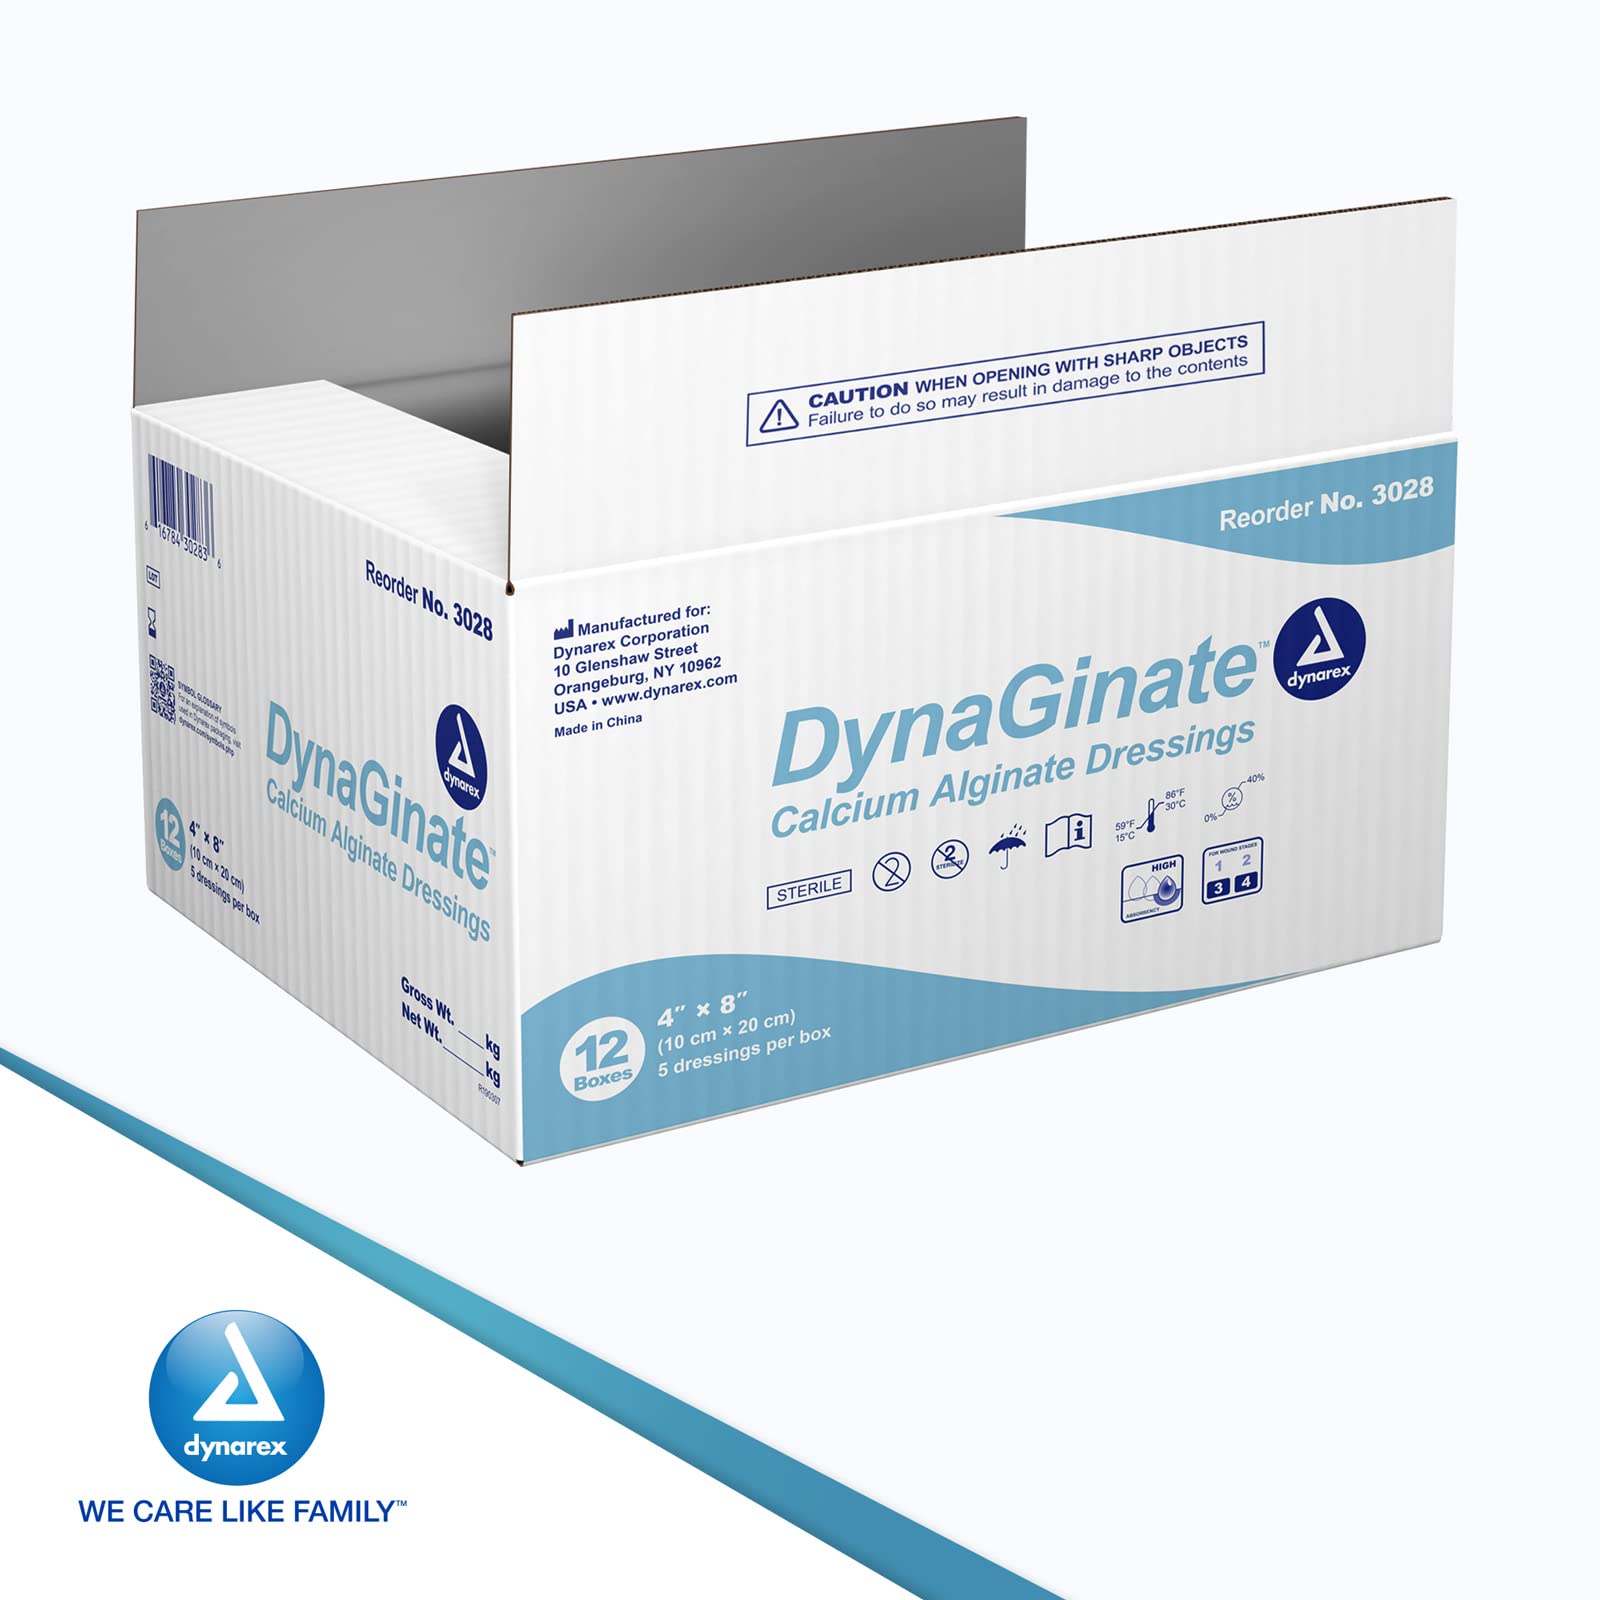 Dynarex DynaGinate Calcium Alginate Wound Dressing - Sterile, Non-Stick Topical Wound Pads - Absorbent Gel Patches For Moderate To High Exuding Cuts - For Medical & Home Use - 4"x 8", 12 Boxes of 5